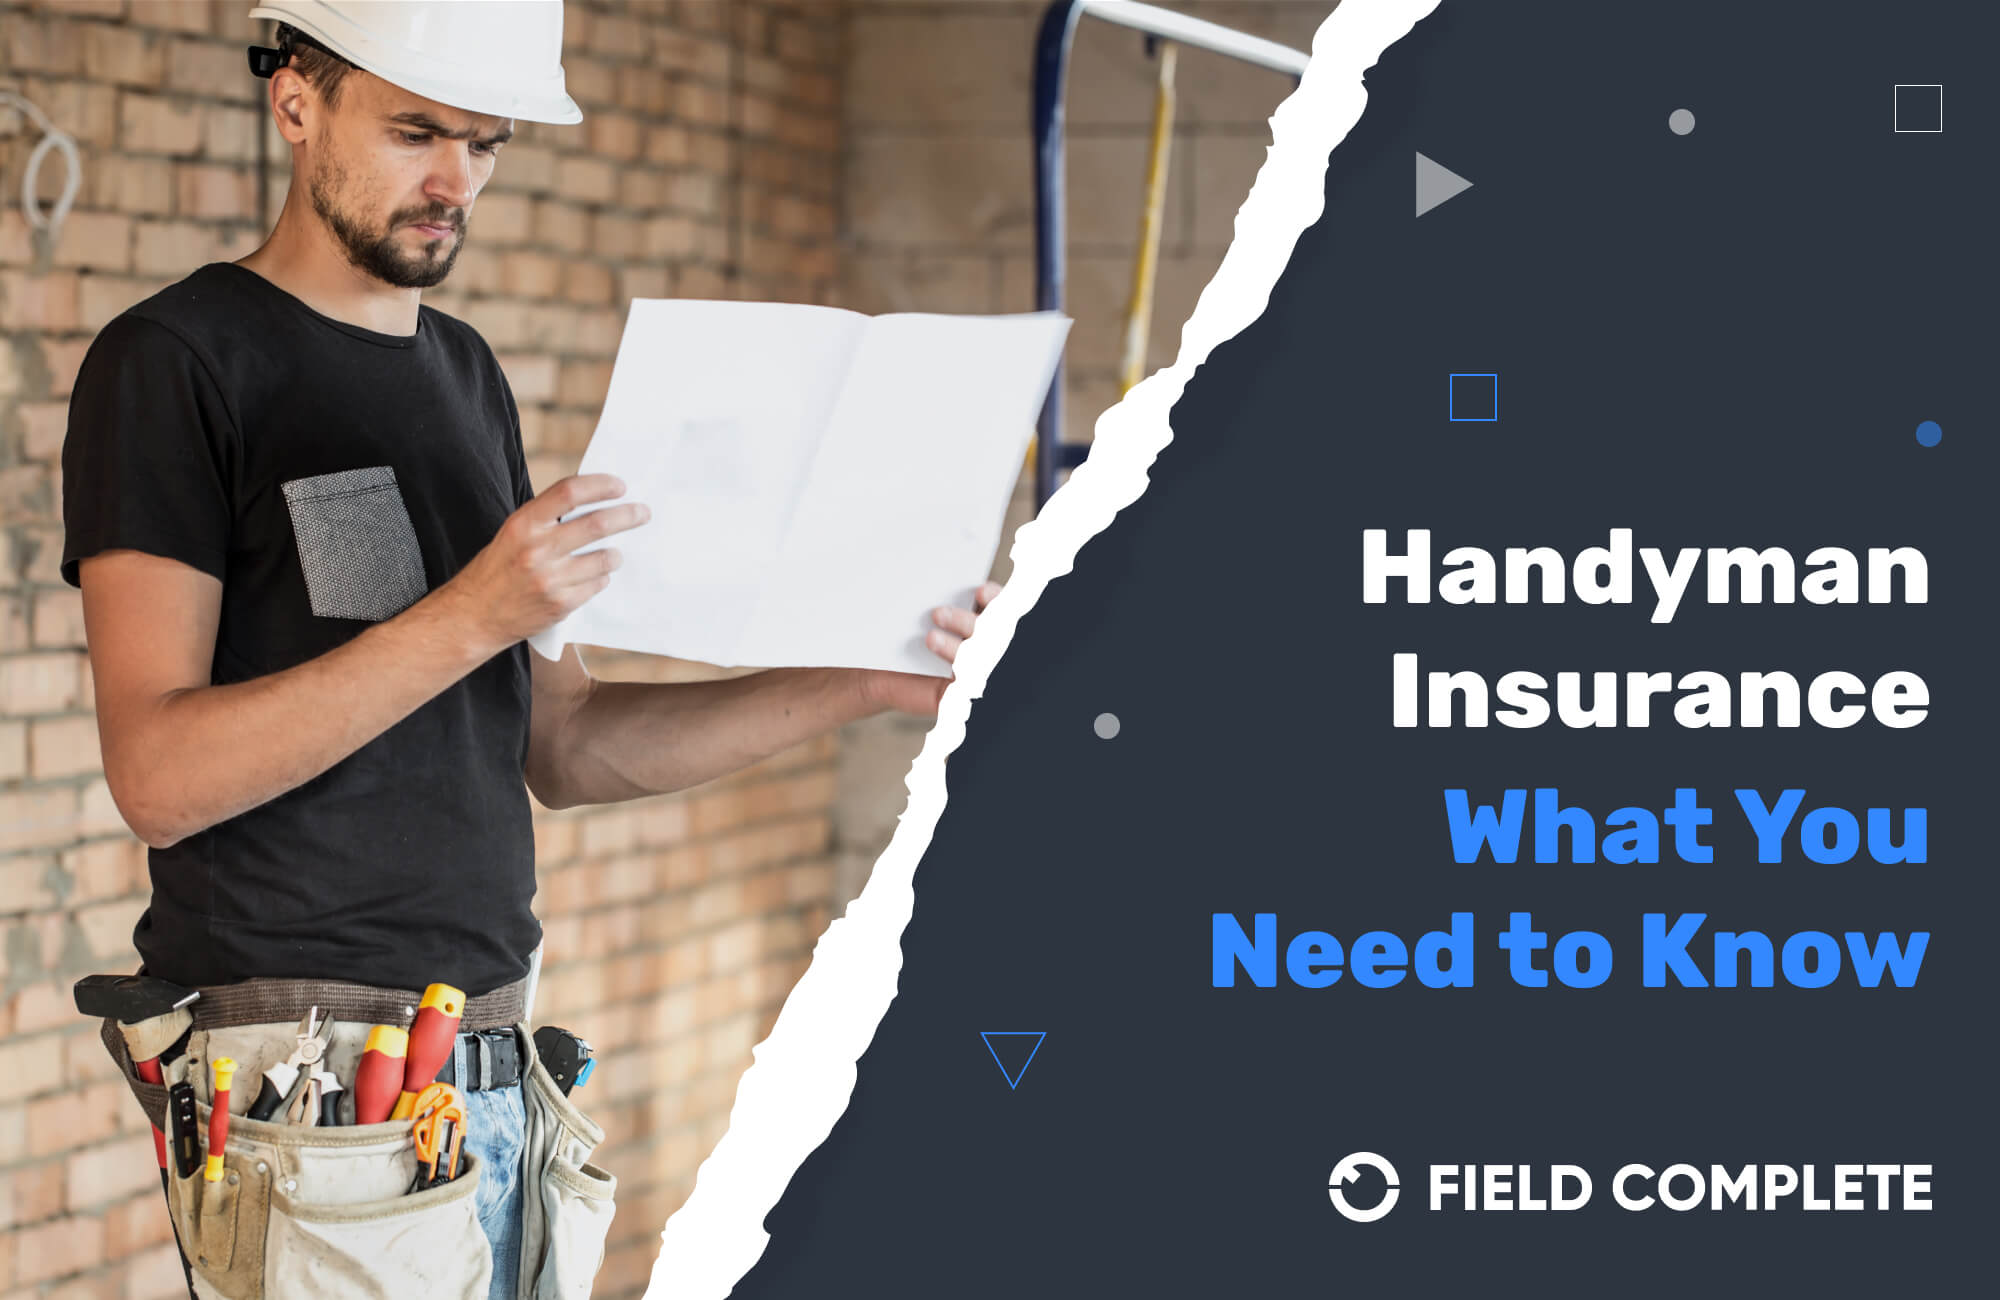 Handyman Insurance: What You Need to Know